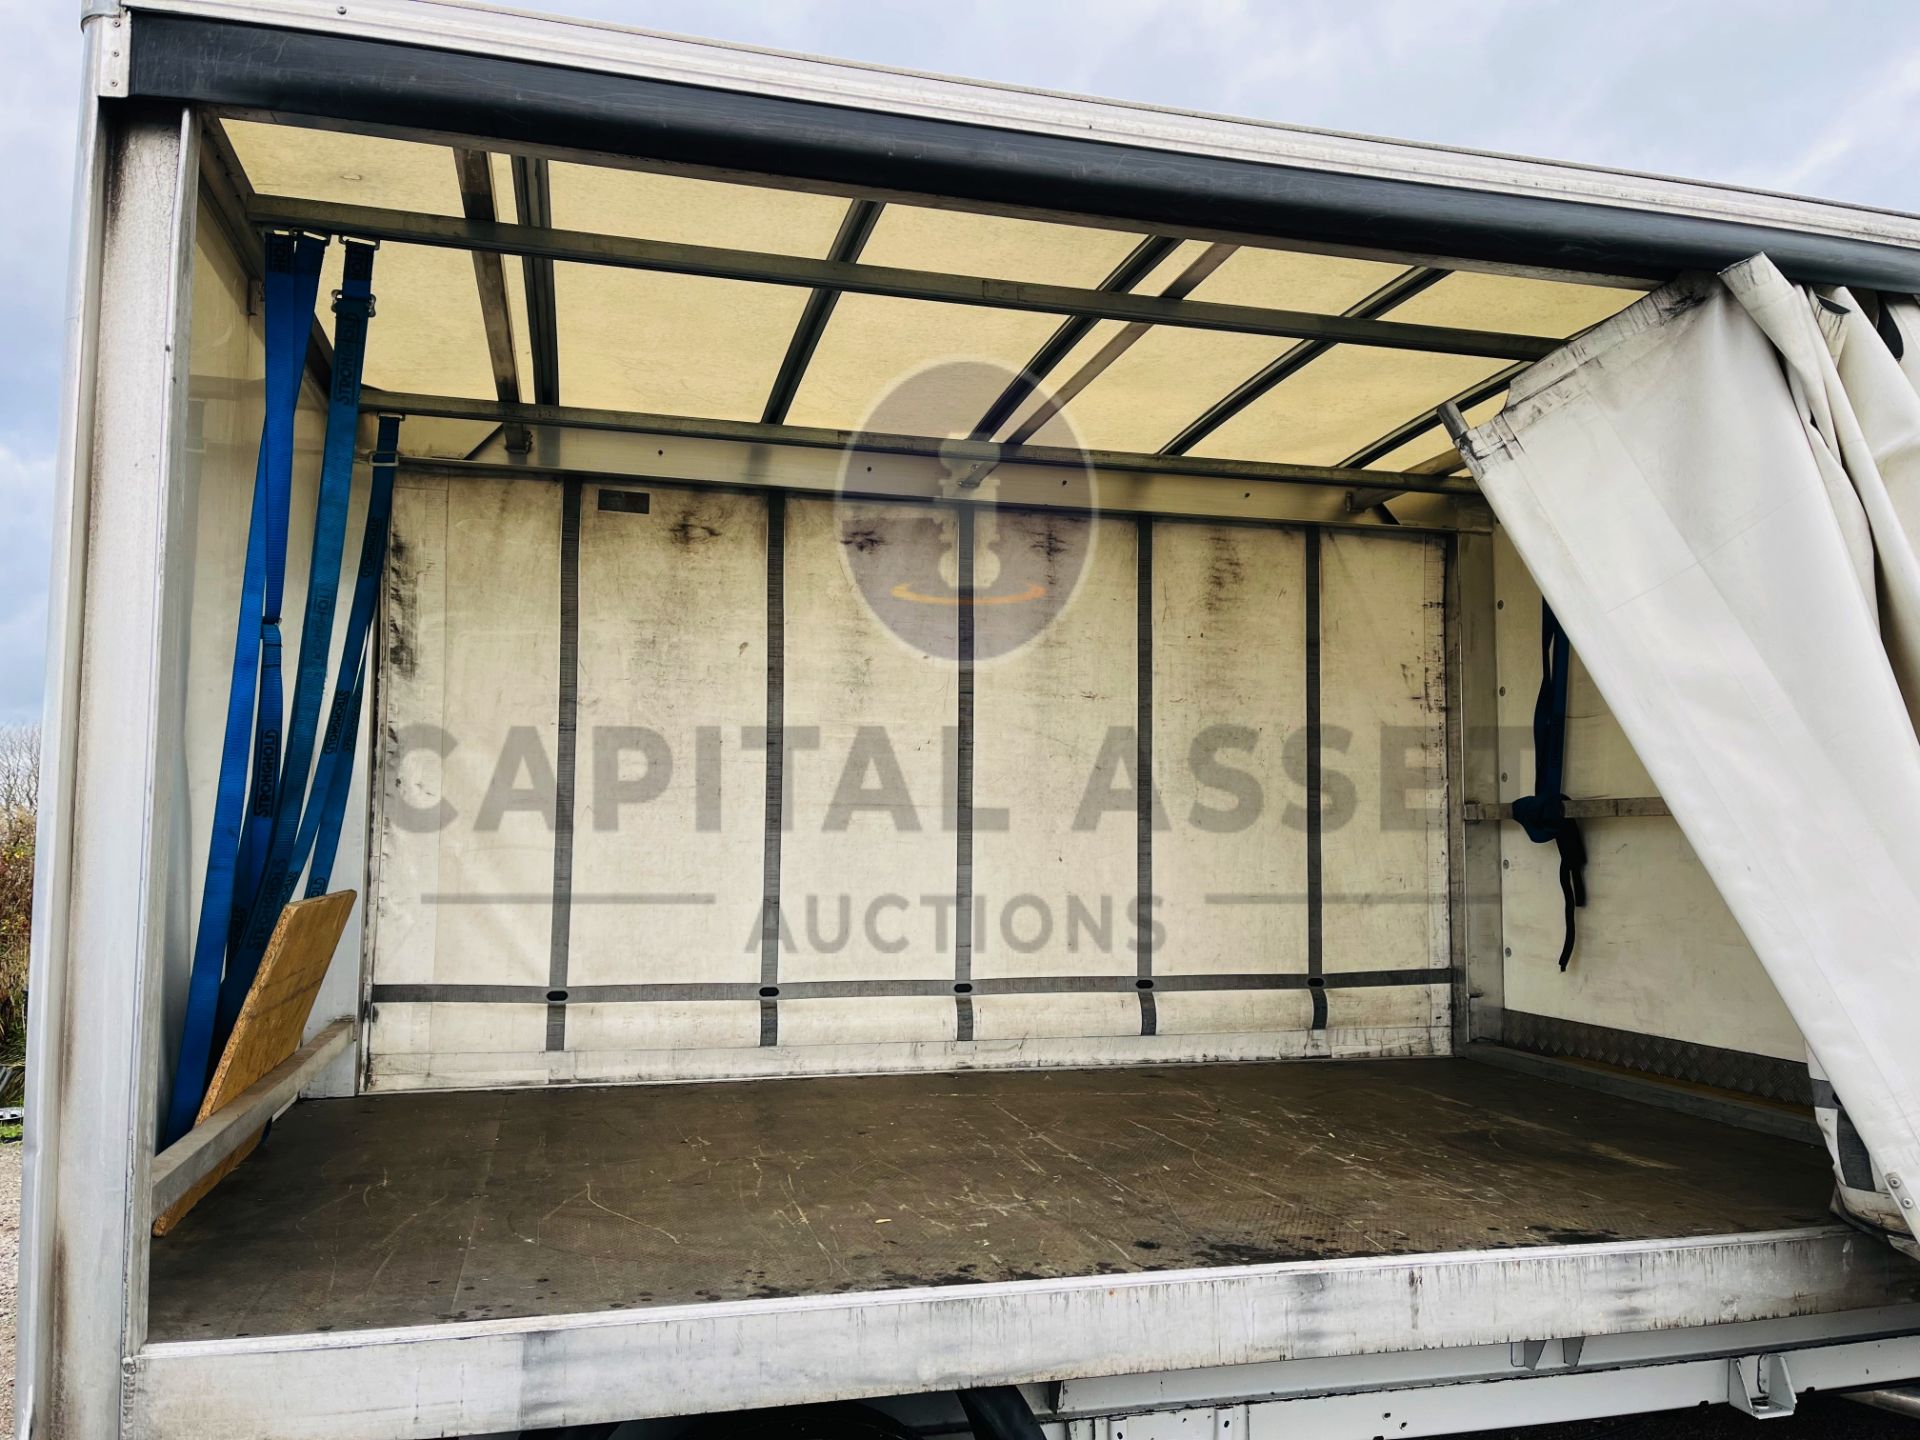 (ON SALE) FIAT DUCATO 2.3 MULTIJET (2019 MODEL) RARE CURTAIN SIDE BODY - 1 OWNER - 360 CAMERA VIEW - Image 23 of 24